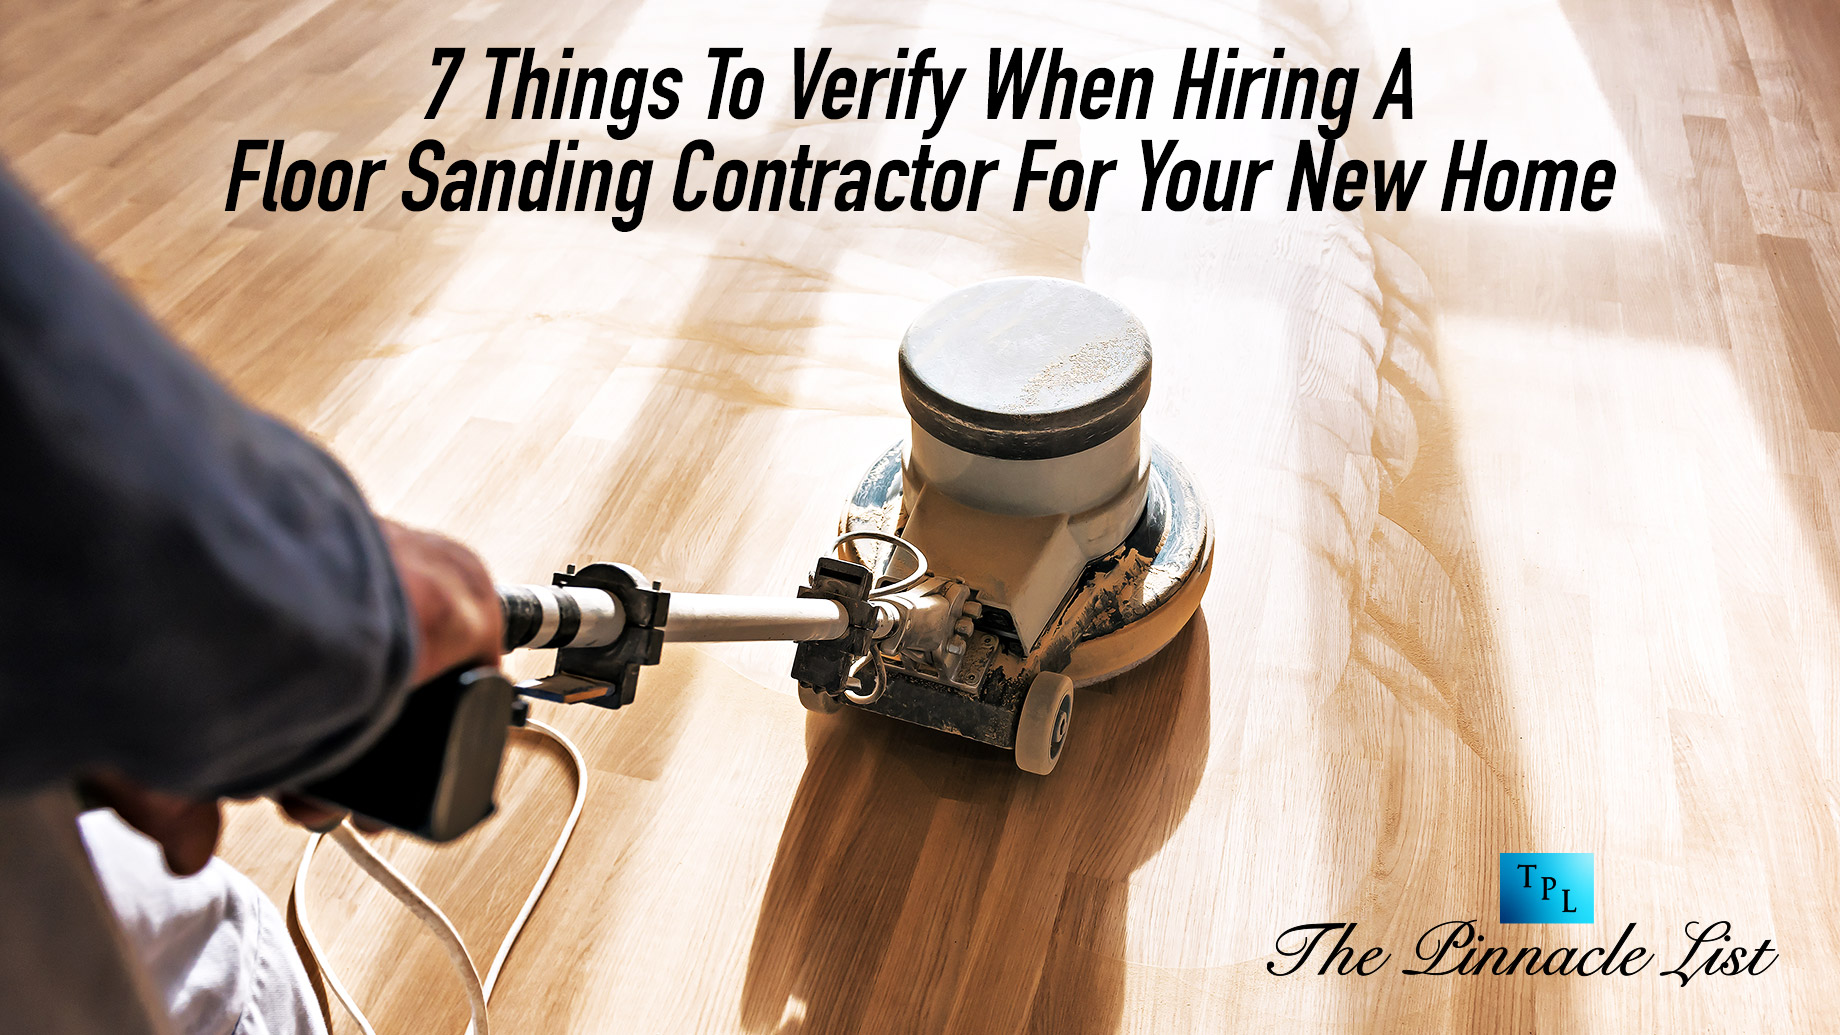 7 Things To Verify When Hiring A Floor Sanding Contractor For Your New Home